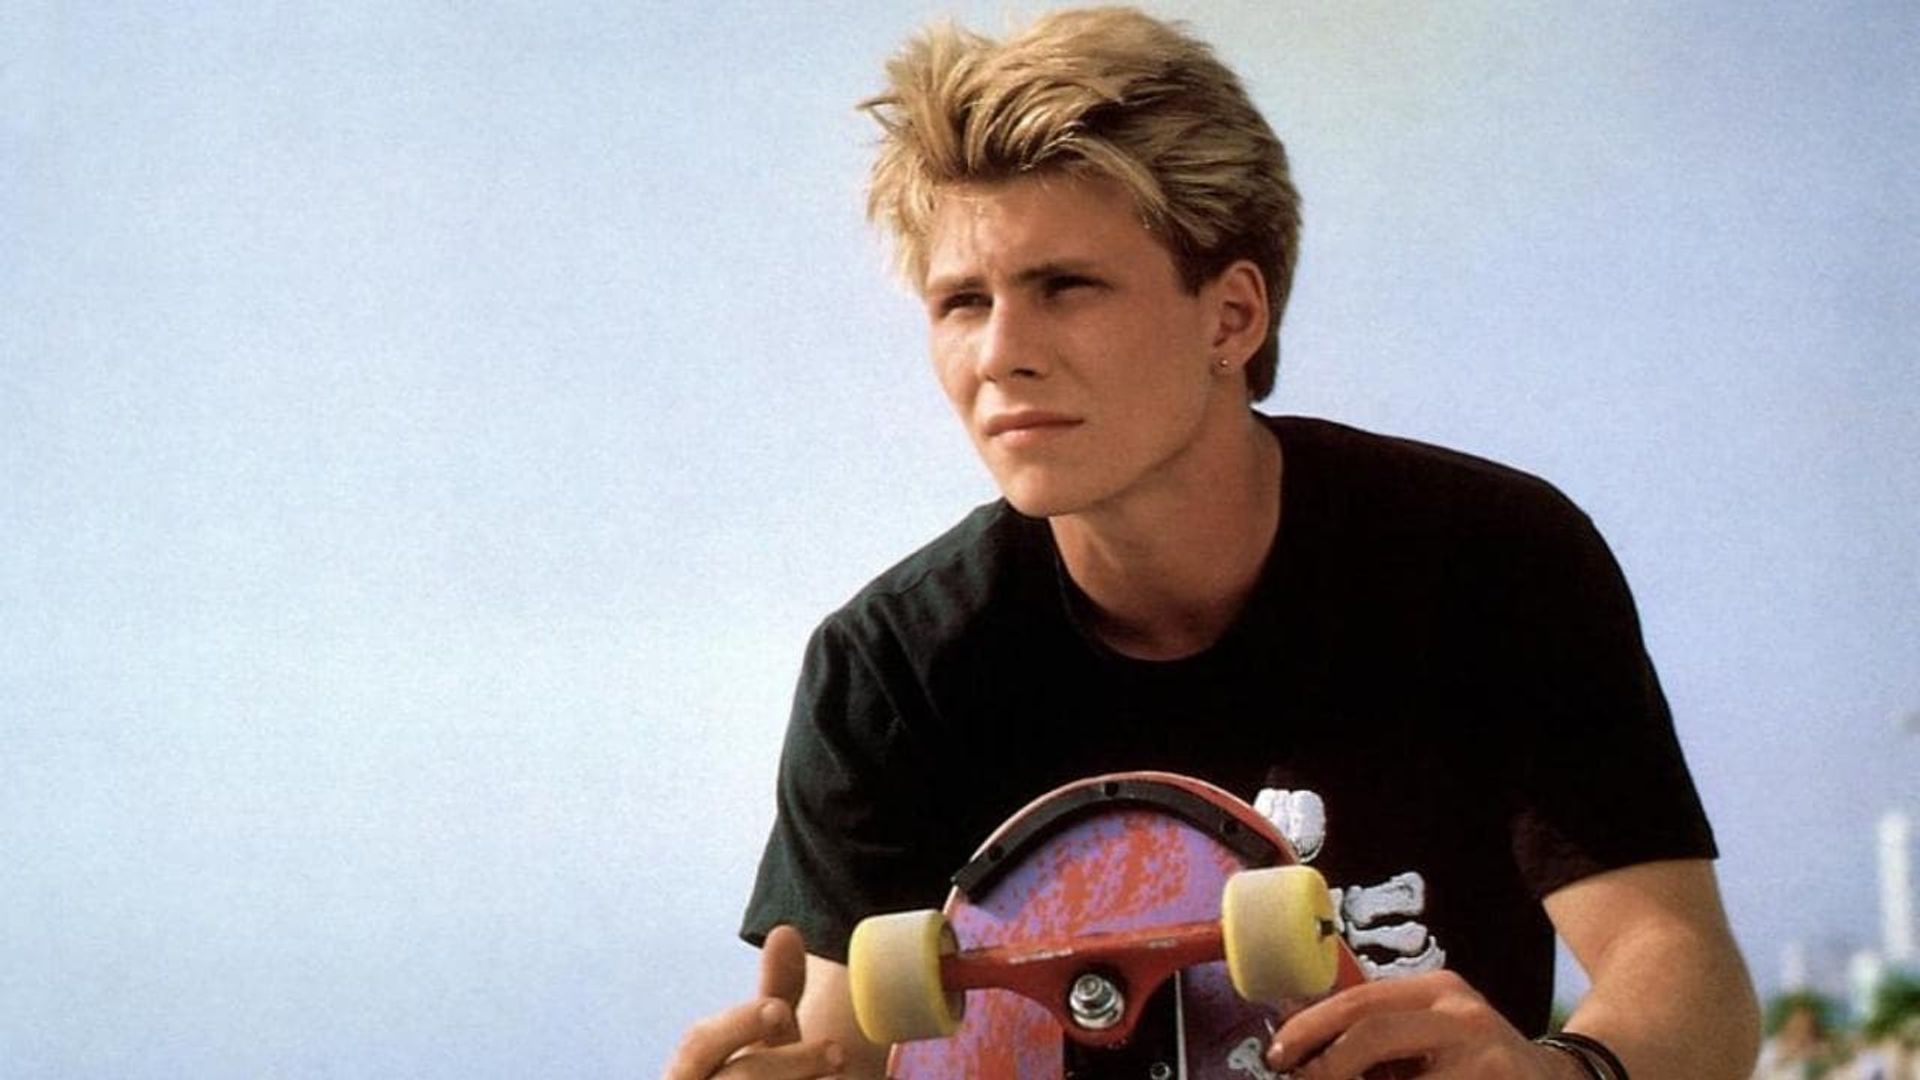 Gleaming the Cube background